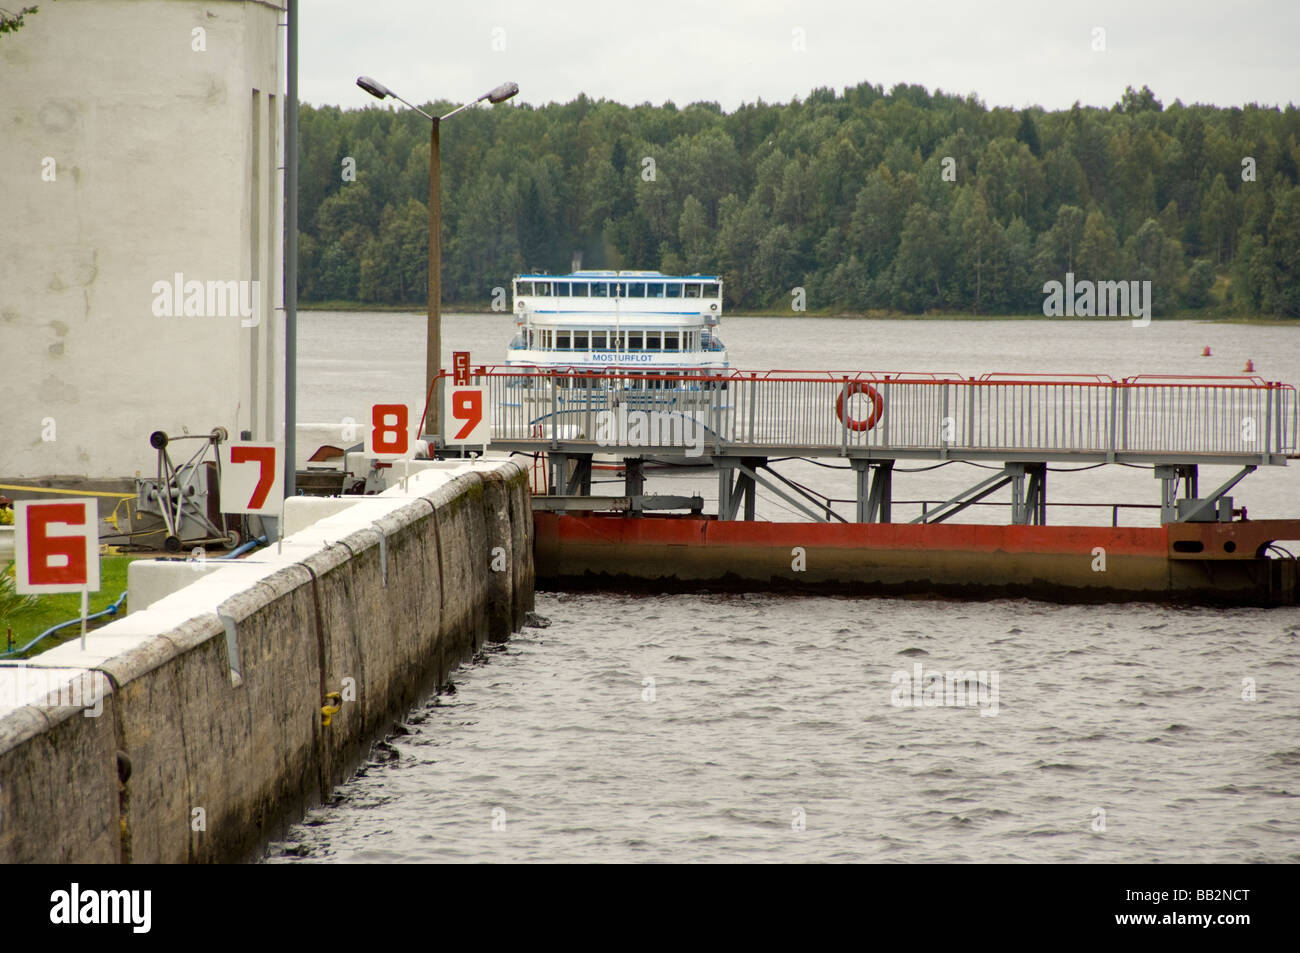 Russia, Svir River (aka The Blue Route), lock area. Riverboat waiting to enter lock. Stock Photo